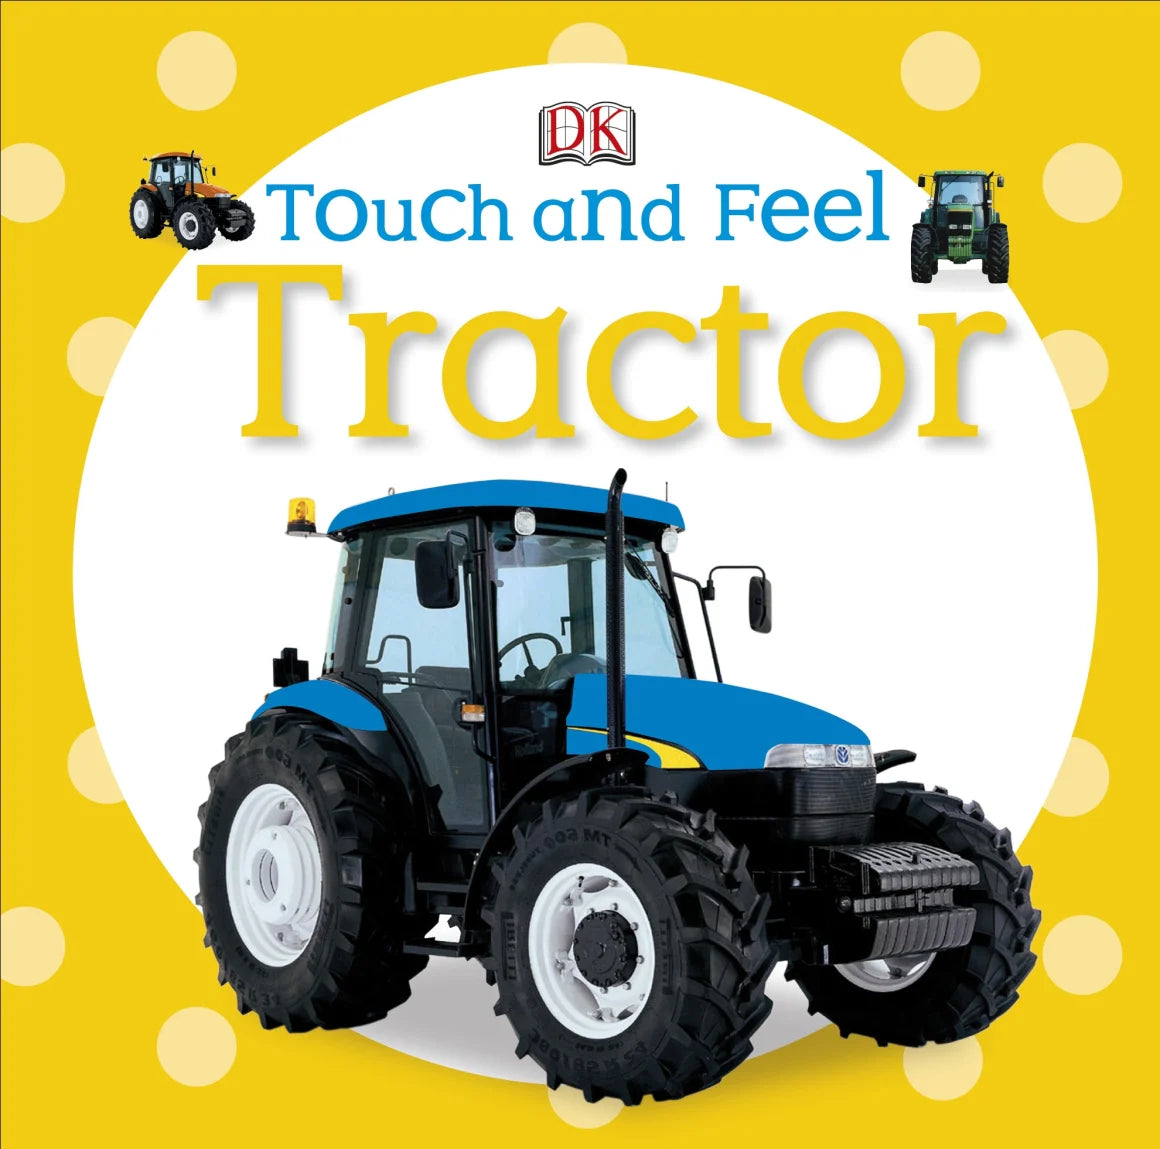 Dorling Kindersley Touch and Feel Tractor